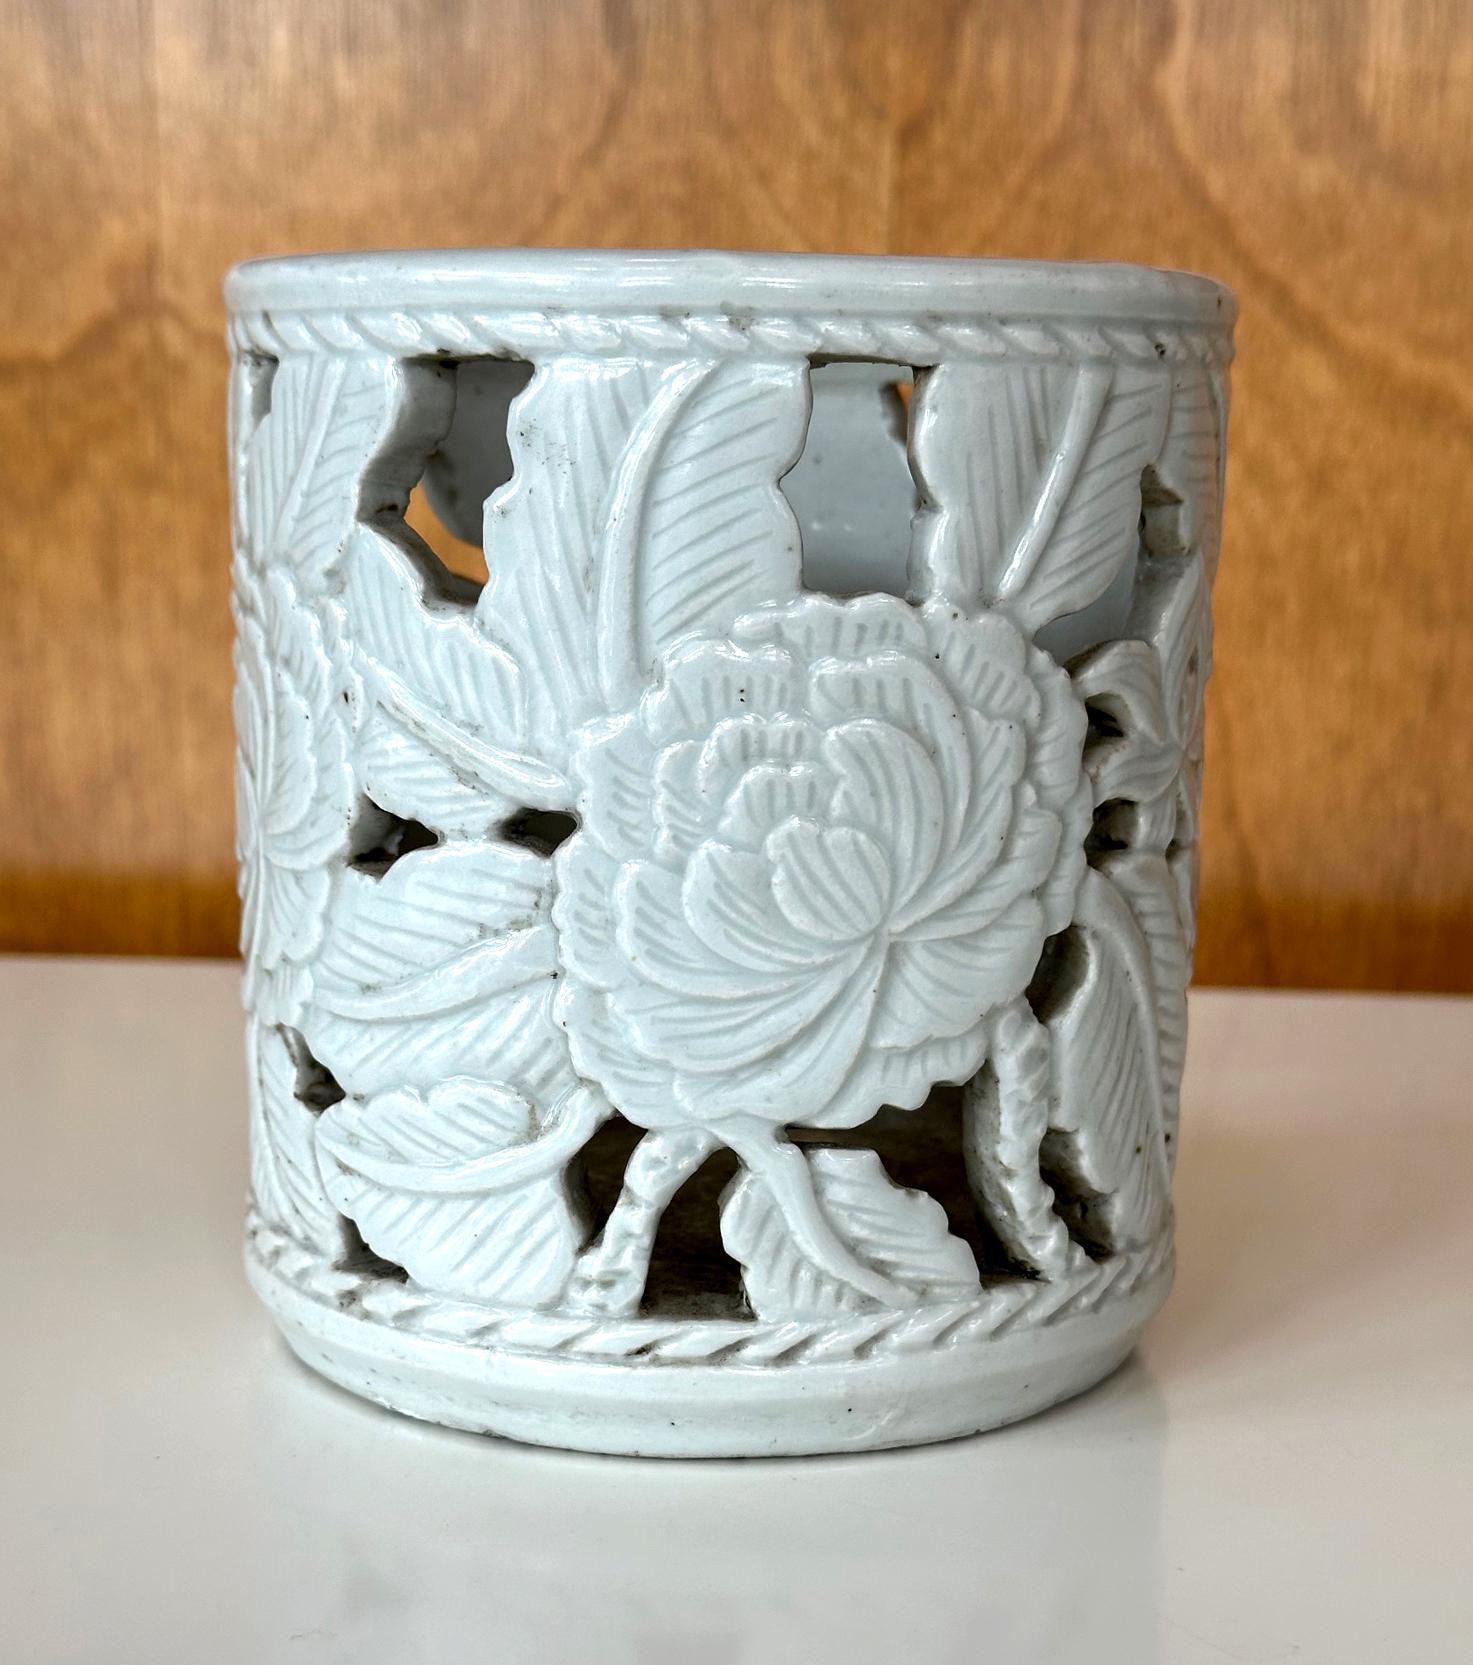 An antique Korean white porcelain brush holder in floral pattern with cutout design from late Joseon dynasty circa 19th century. Cherished by the scholars, this brushpot would grace the desk of the man's study. Bordered by the thin ribboned bands of